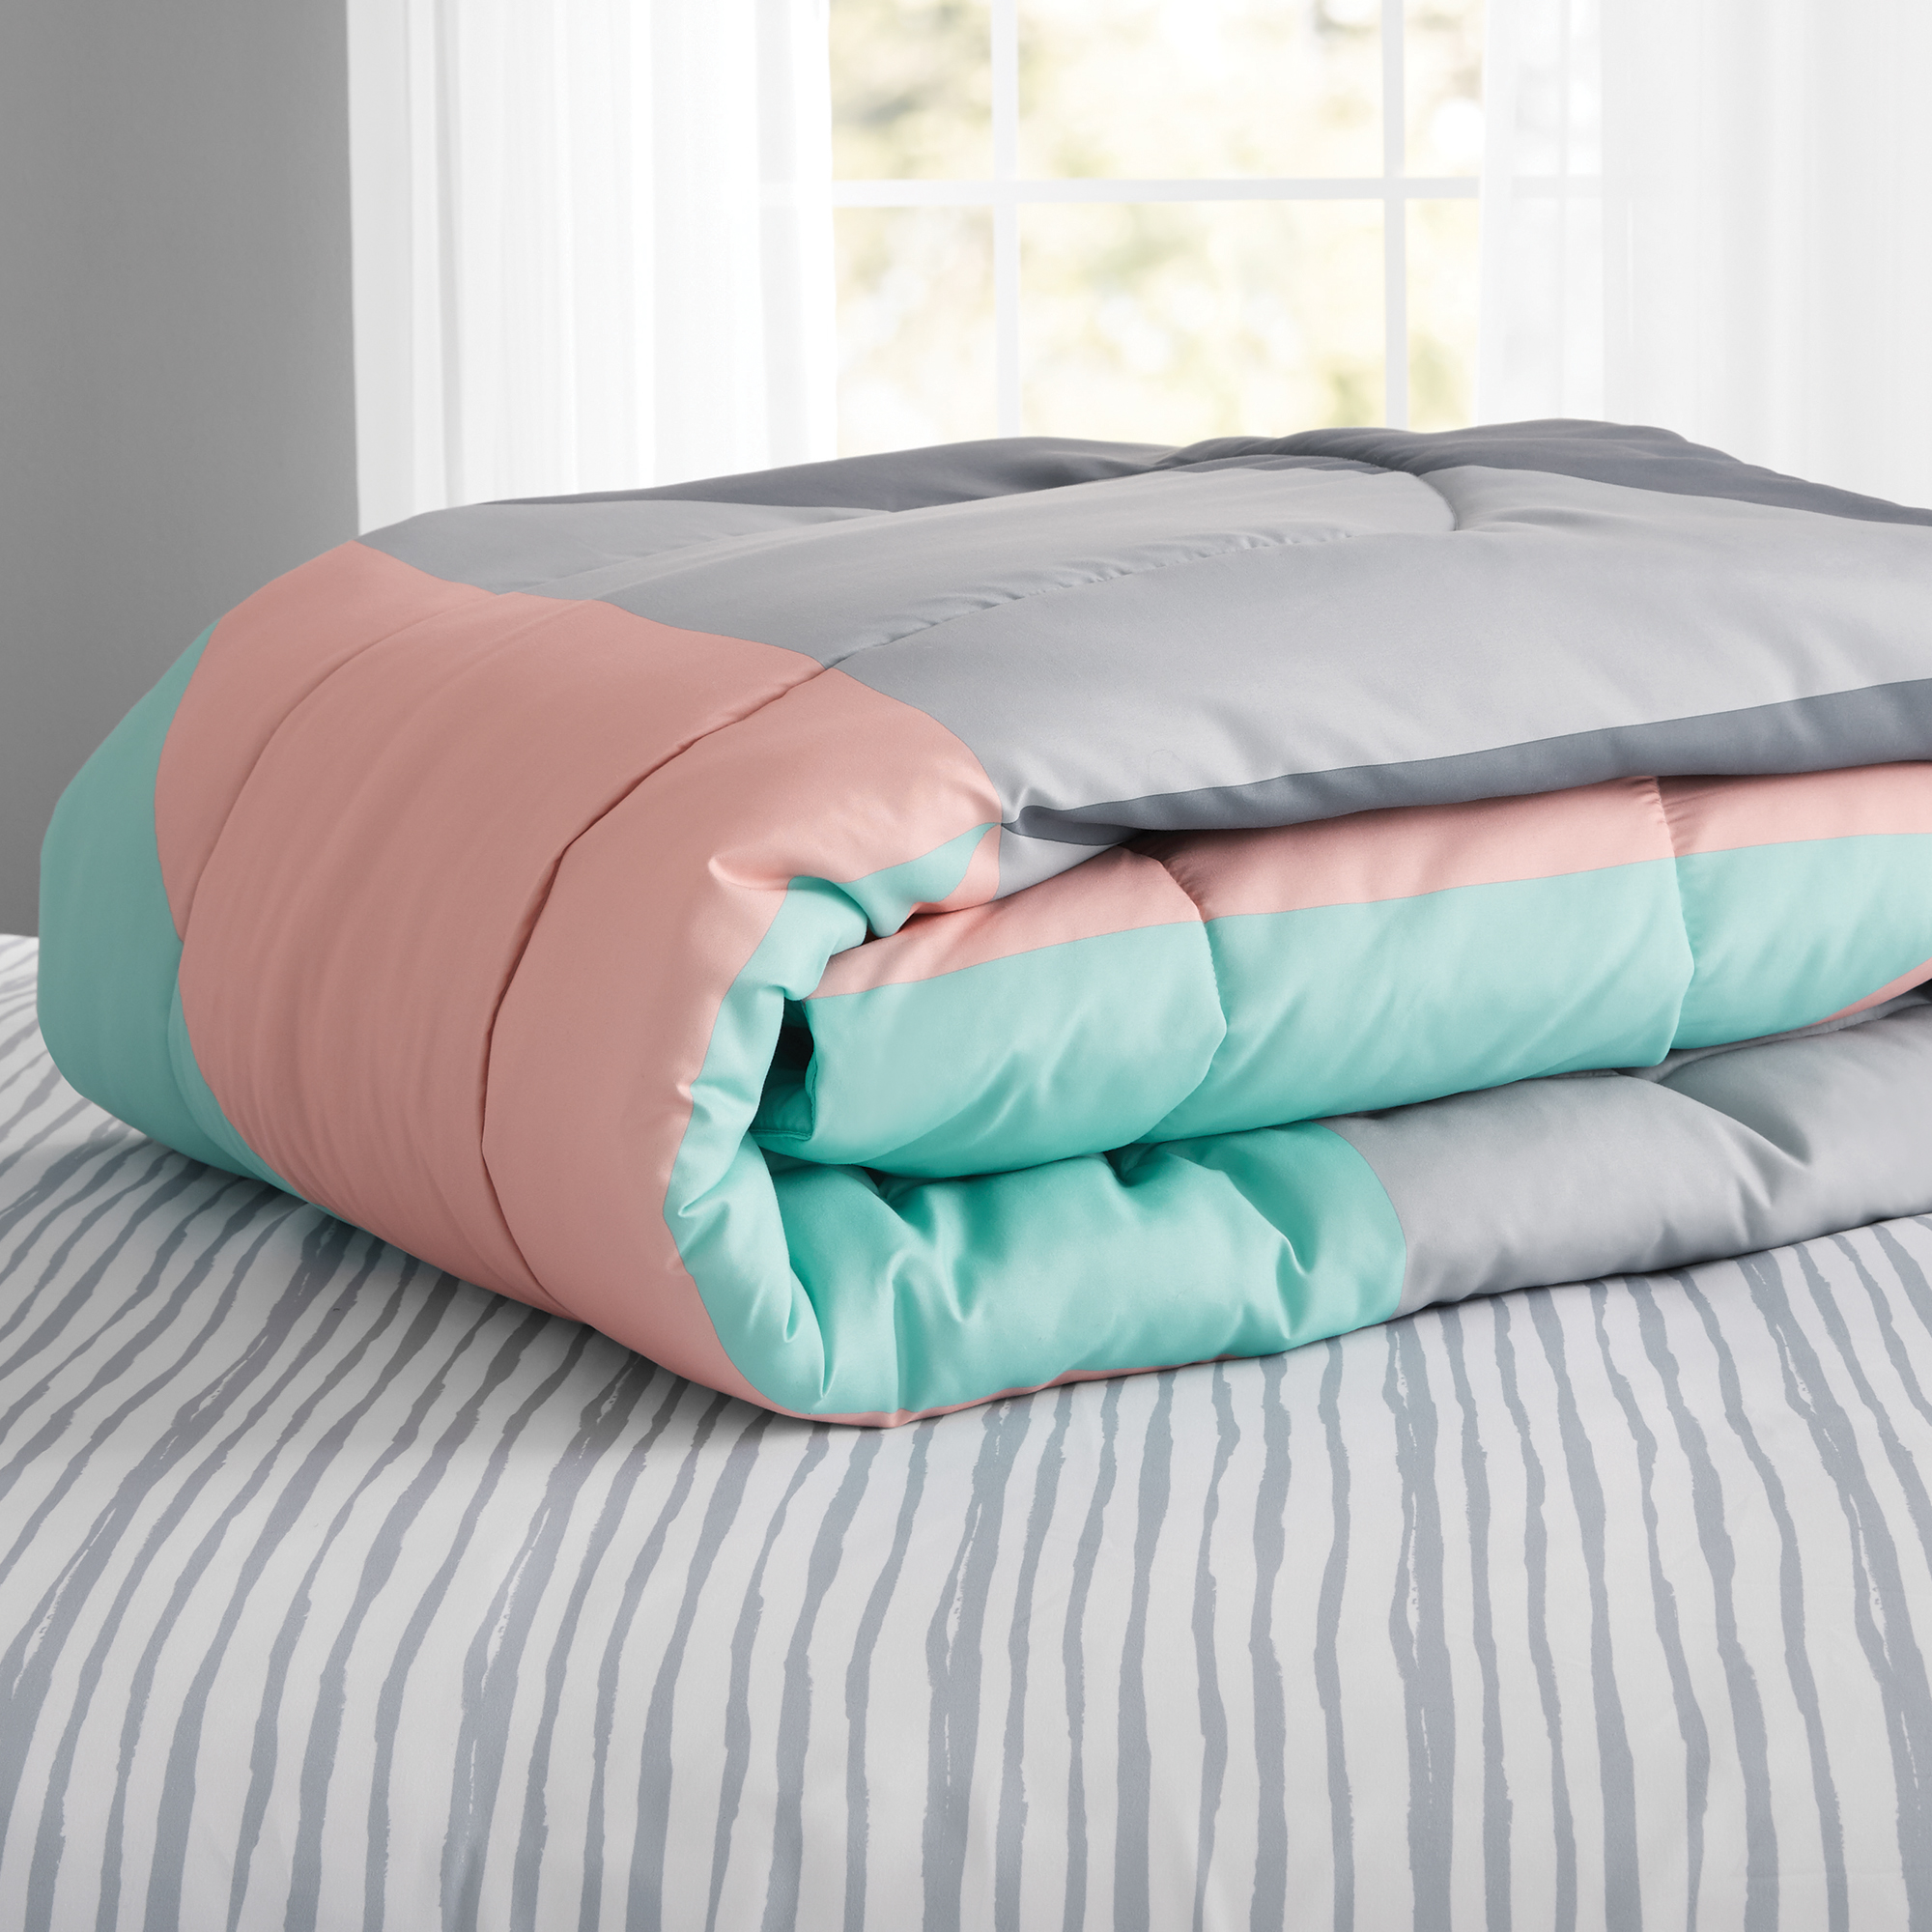 Mainstays Gray and Teal Geometric 8 Piece Bed in a Bag Comforter Set With Sheets, King - image 5 of 8